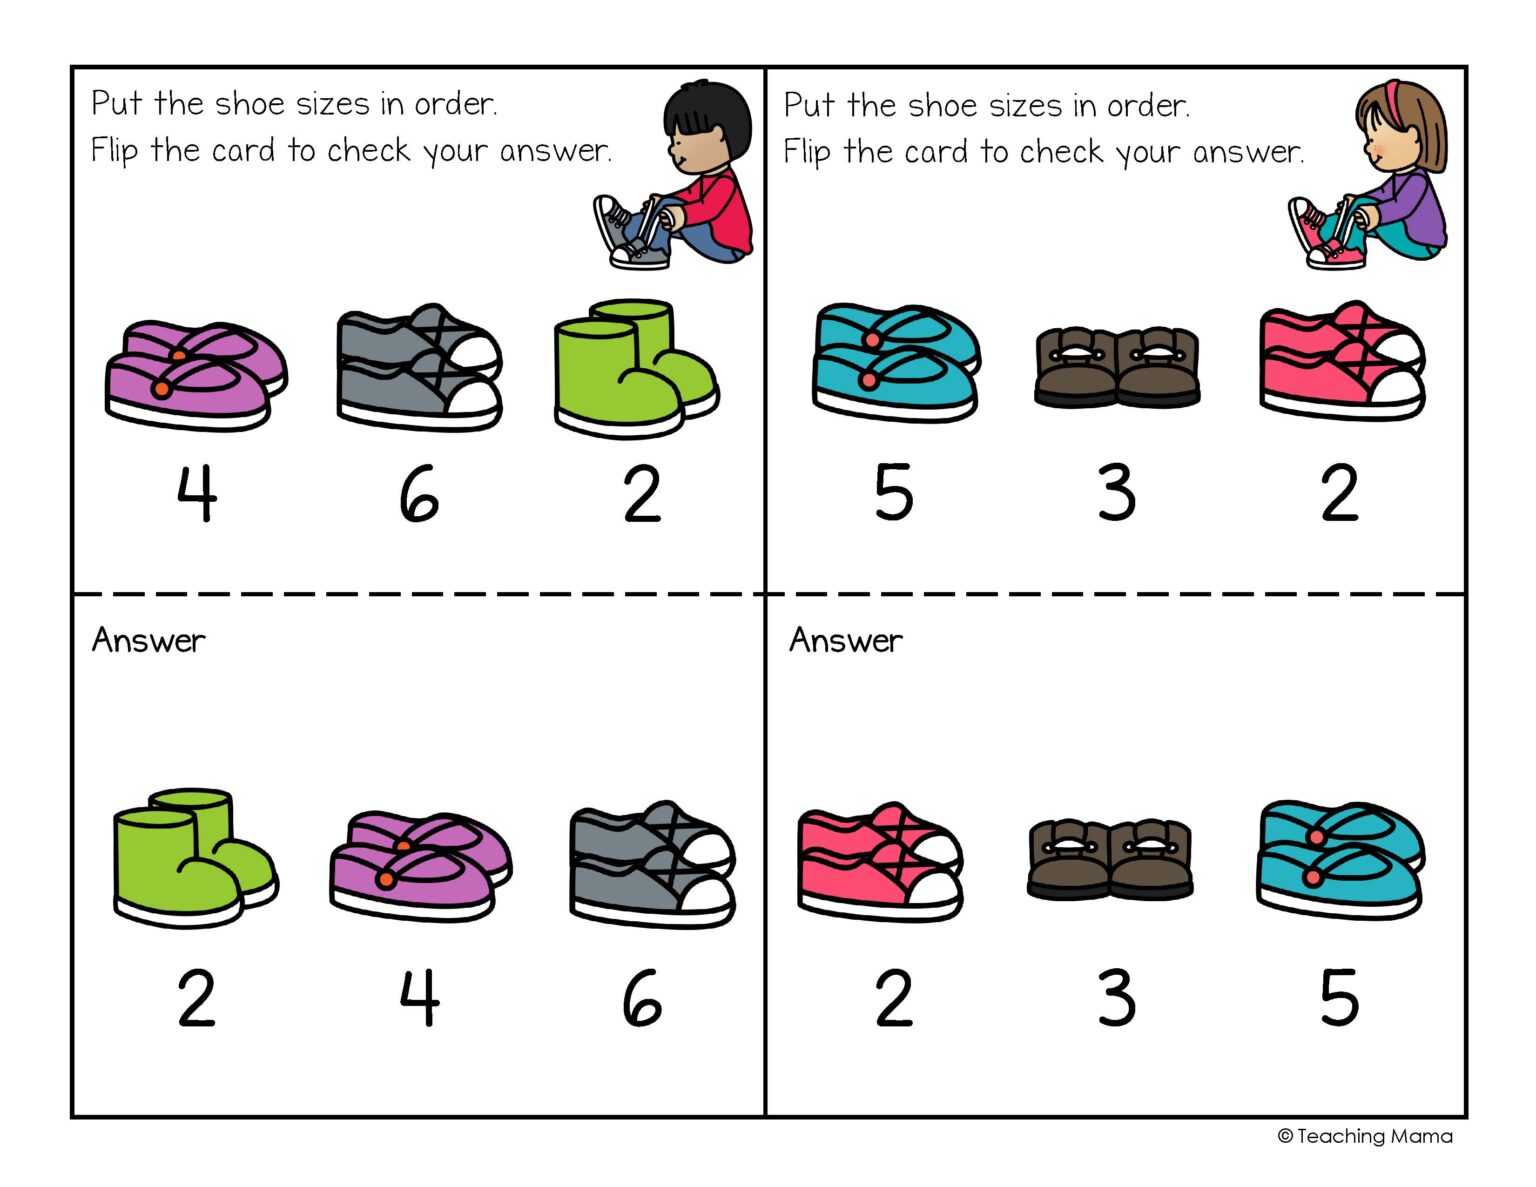 shoe-size-sequencing-task-cards-teaching-mama